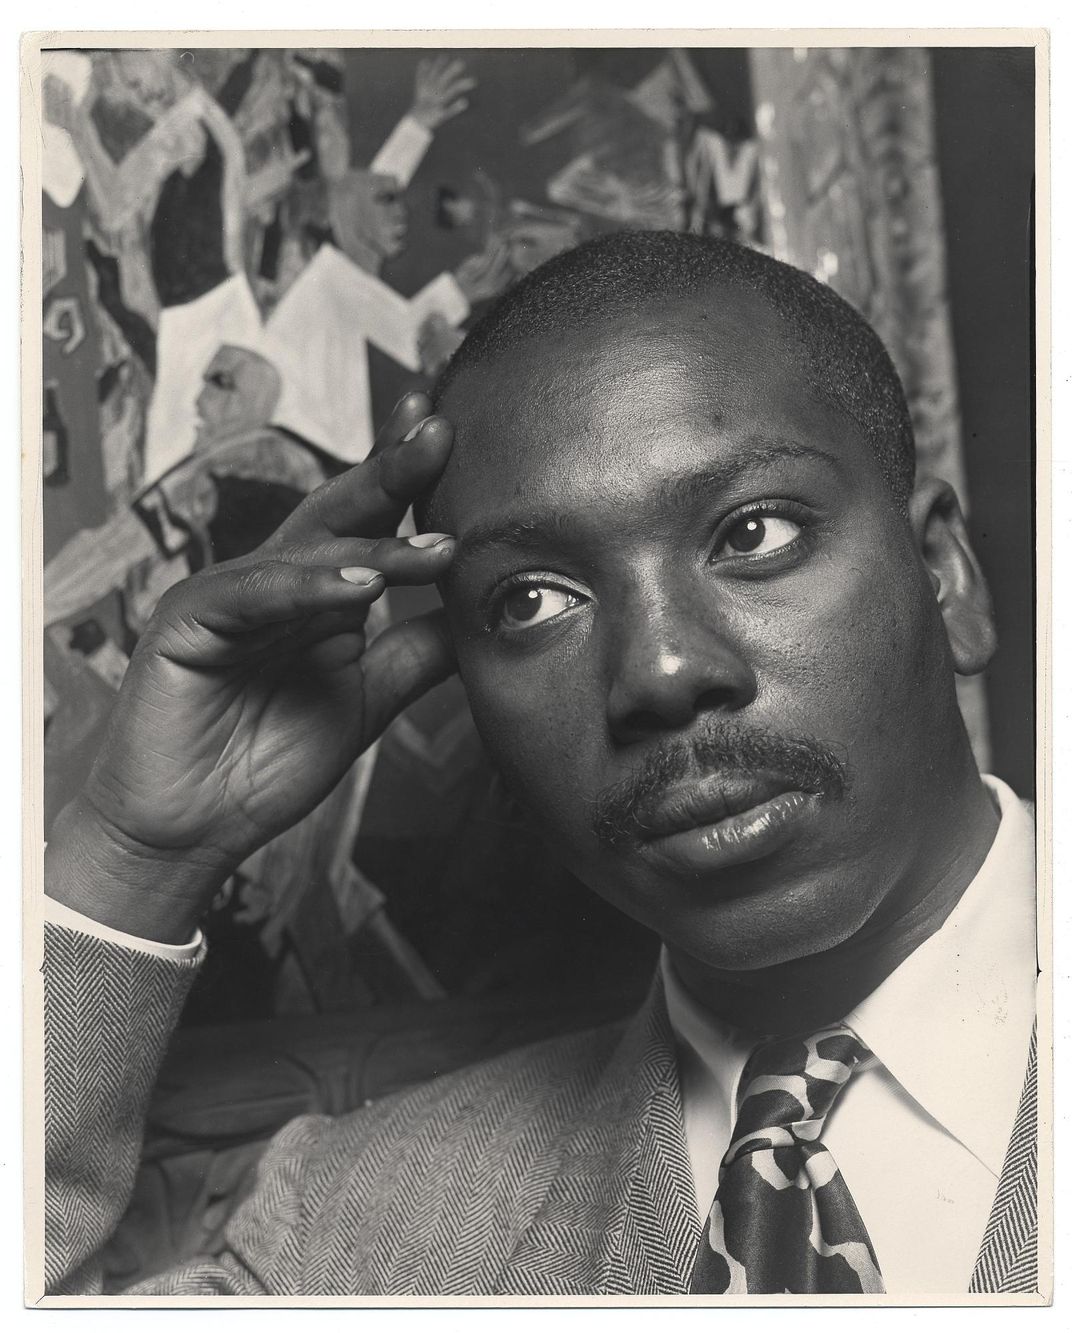 A black and white image of Lawrence, a black man with a mustache, looking contemplative with a suit and tie and resting his head against his hand, in front of one of his works of art